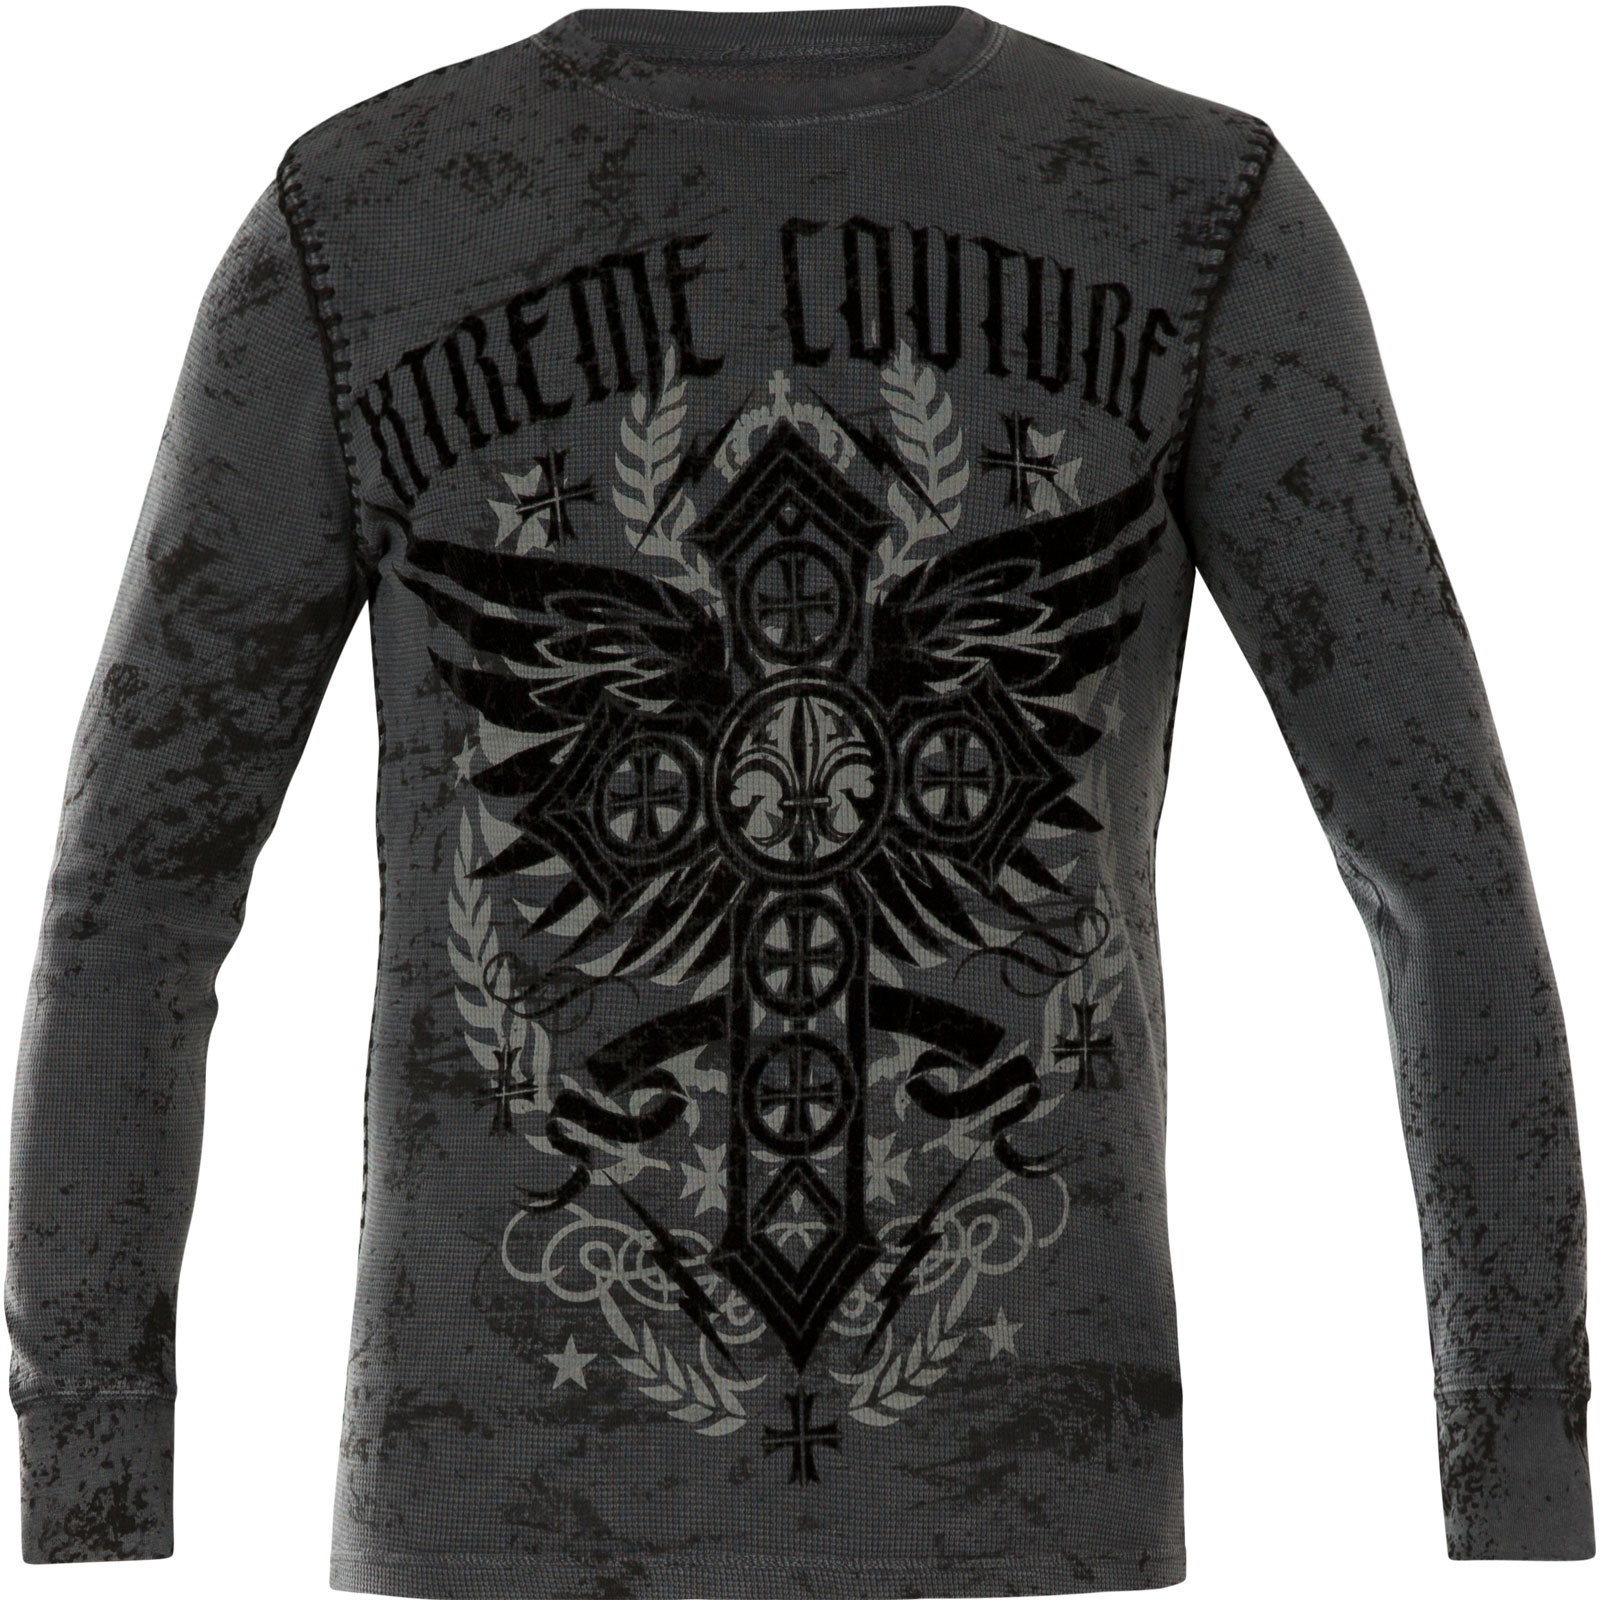 Xtreme Couture by Affliction Thermal Status Unknown in Grey features ...